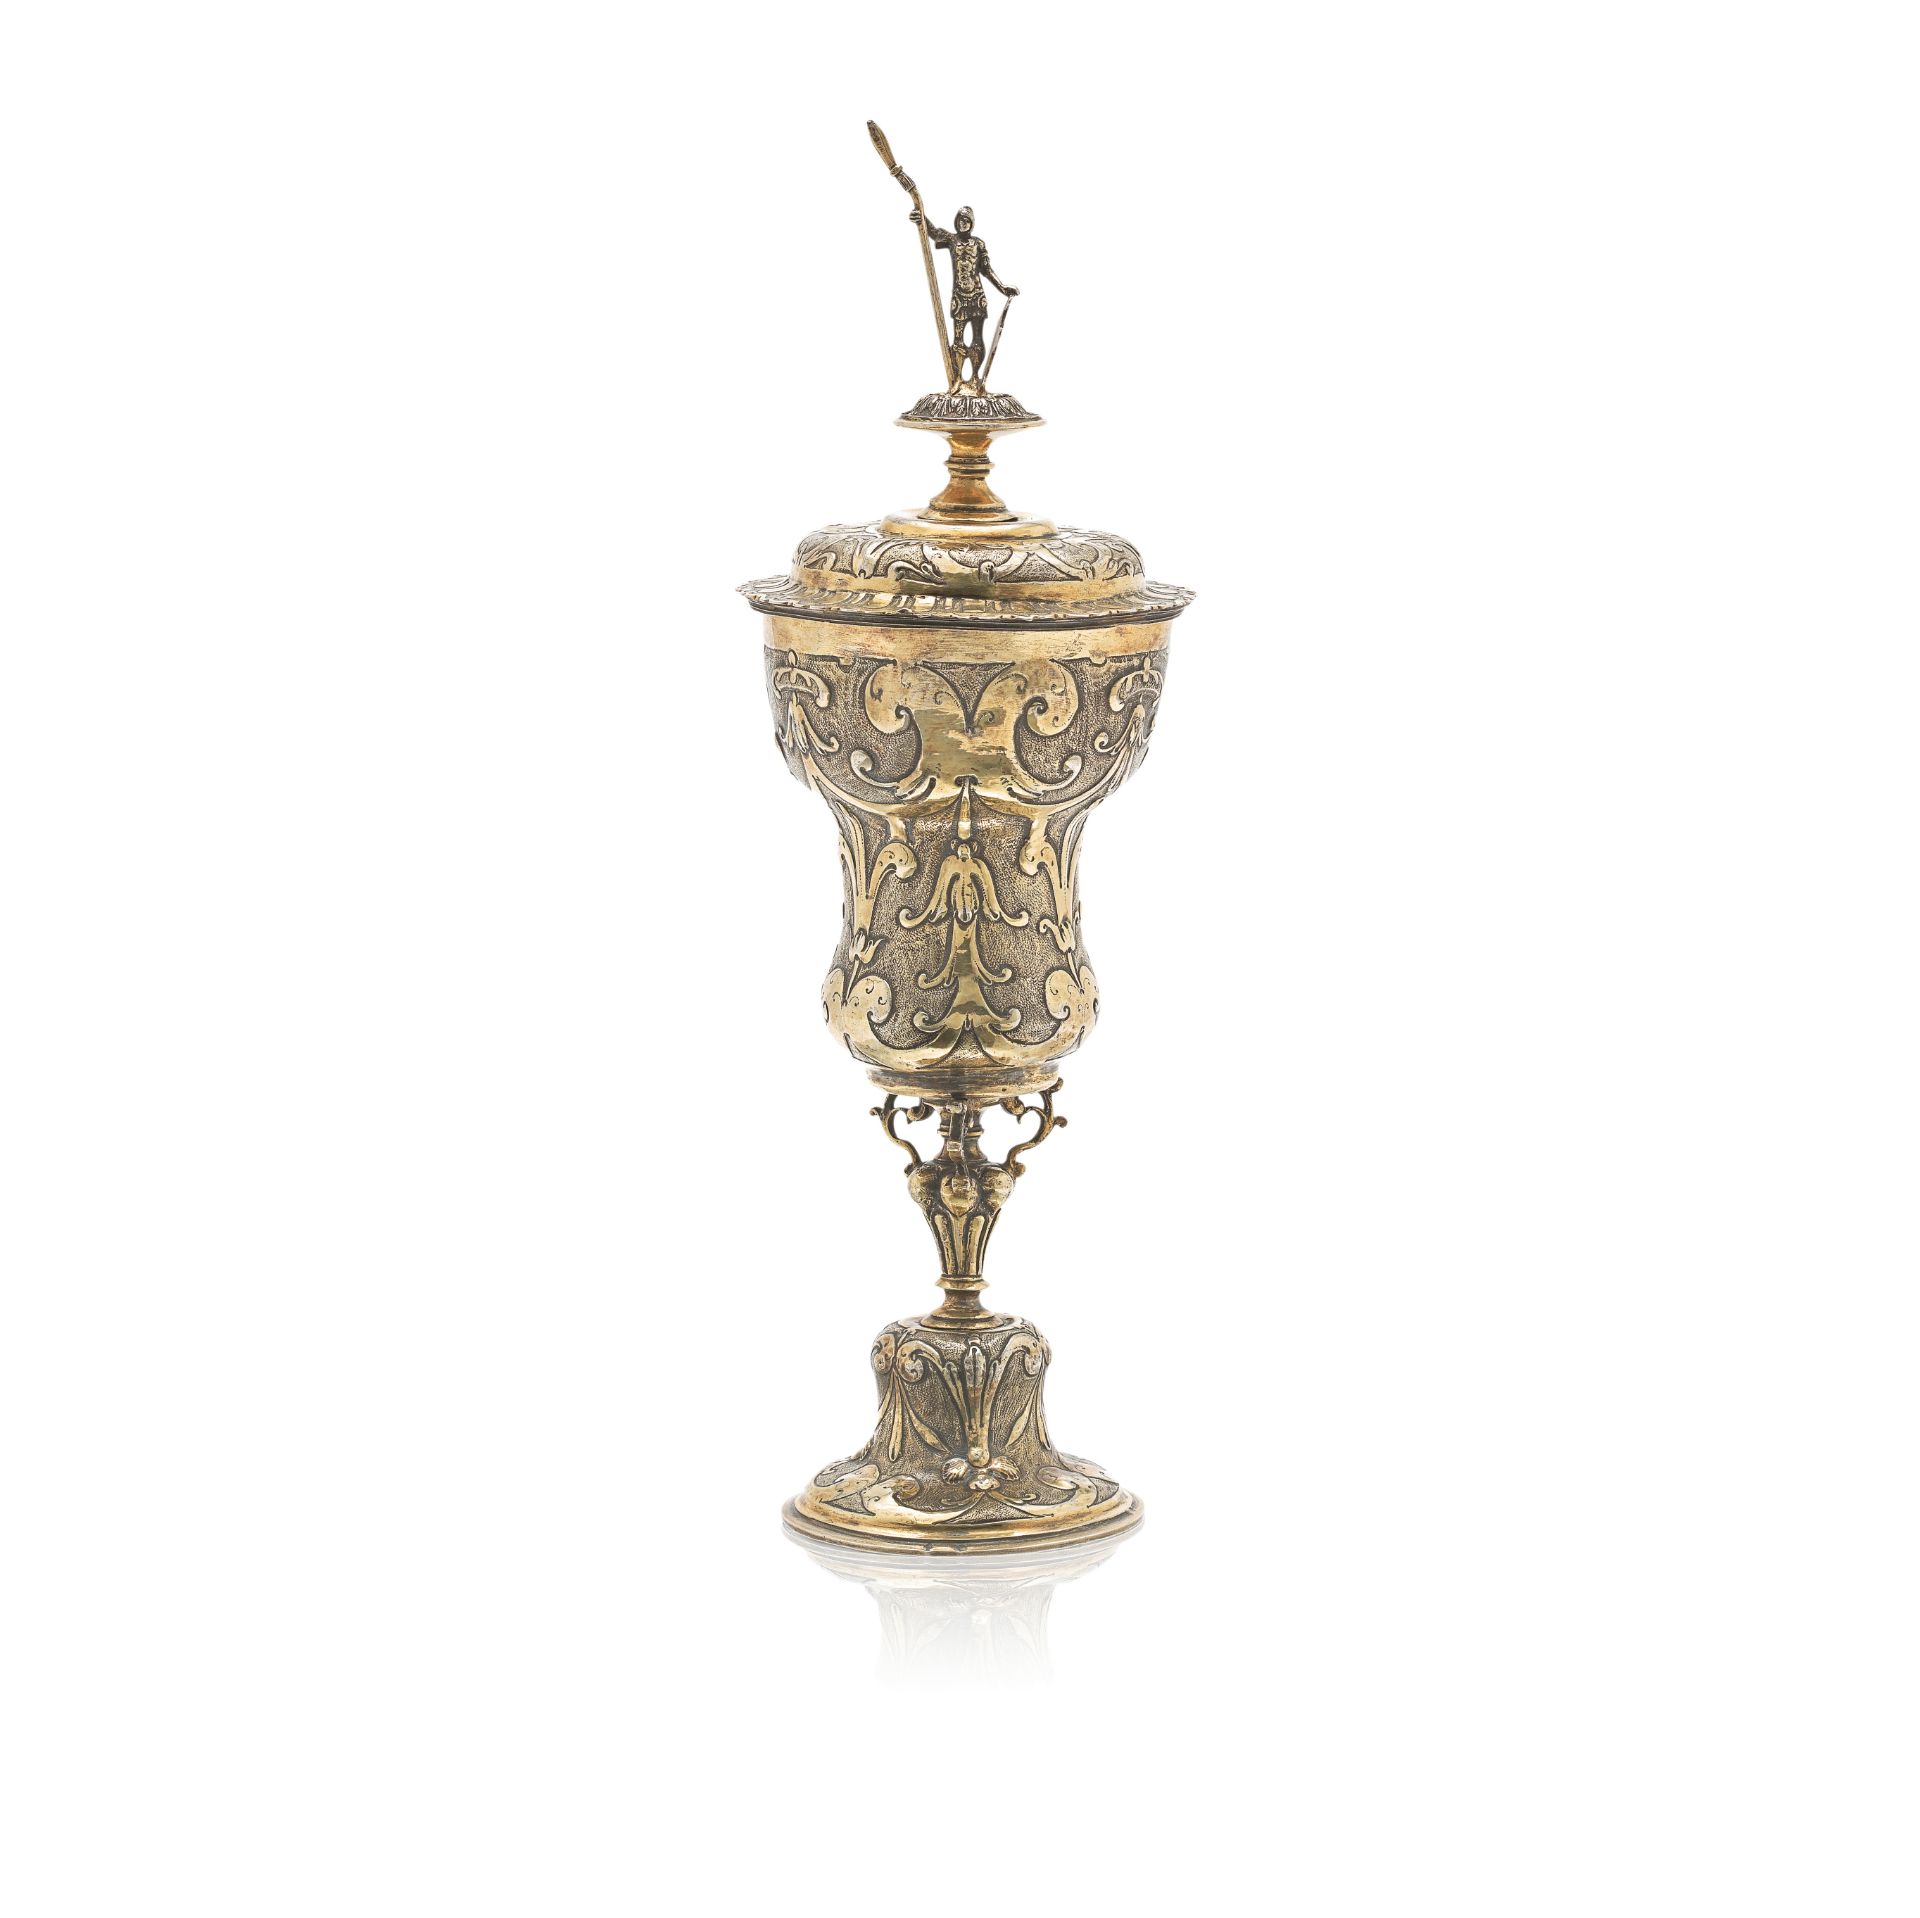 A German silver-gilt standing cup and cover Unknown maker's mark of 'an orb', Augsburg circa 1615